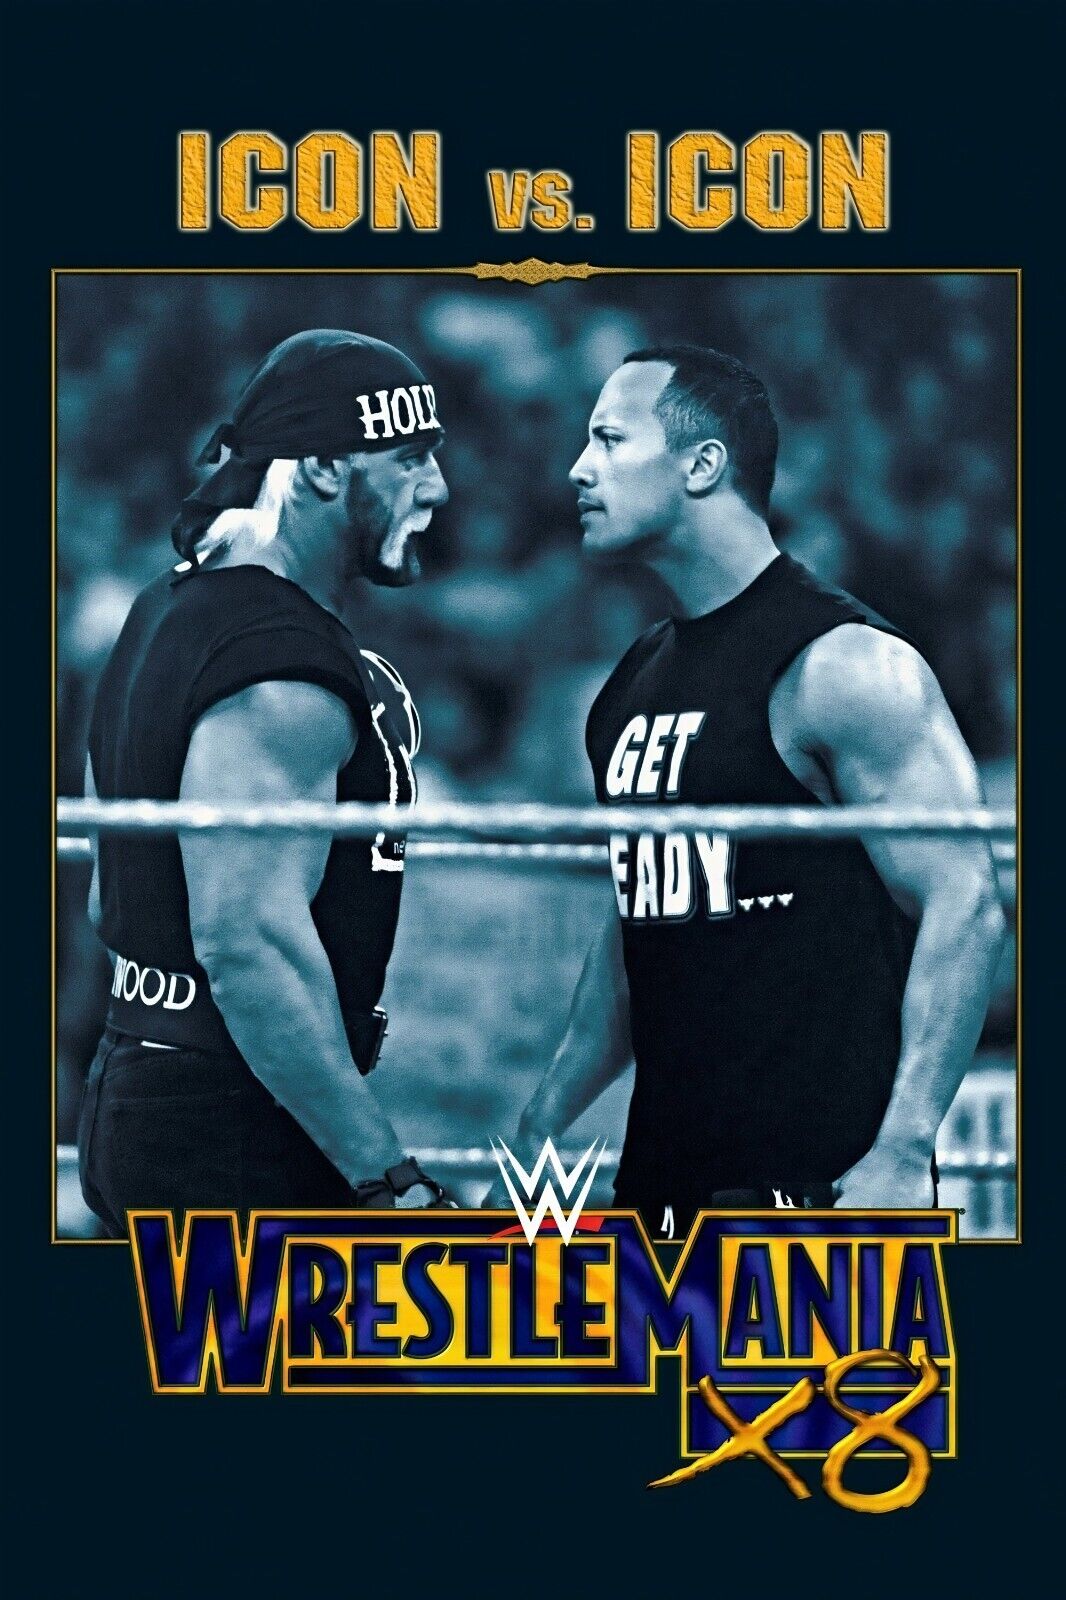 WWE Wrestlemania 18 Poster (2002) - 11x17 Inches | NEW USA